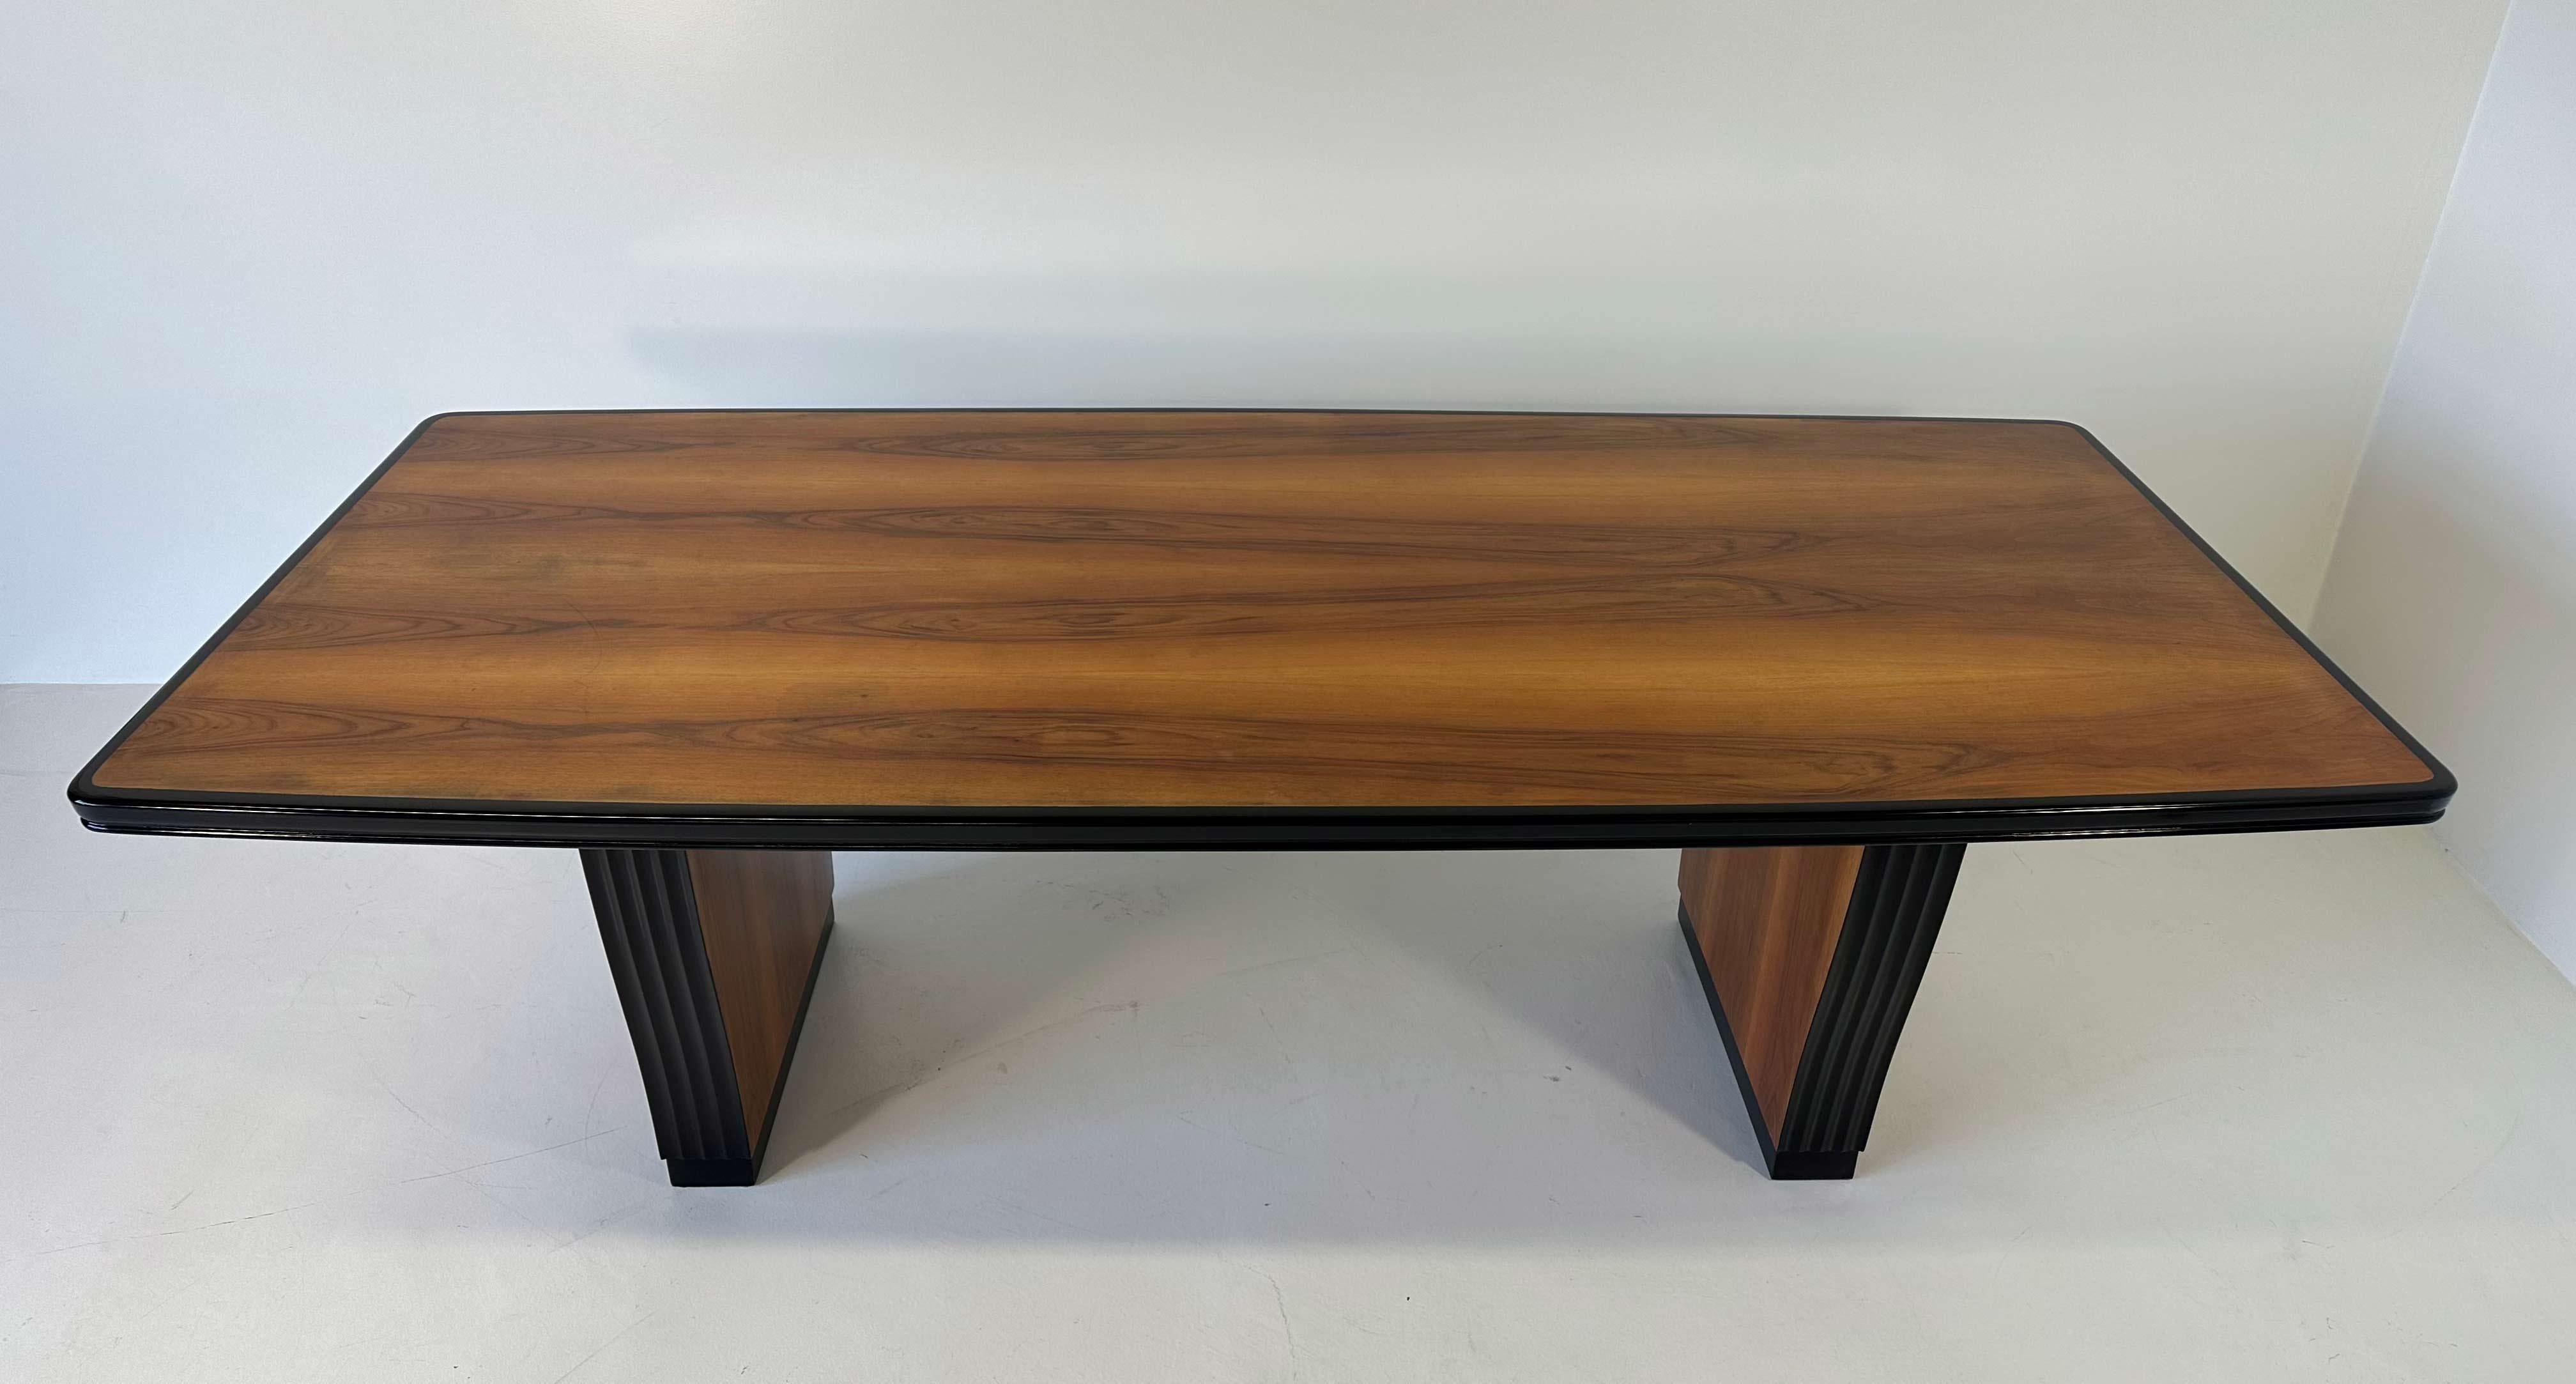 Italian Art Deco Walnut and Black Lacquer Table, 1930s For Sale 5